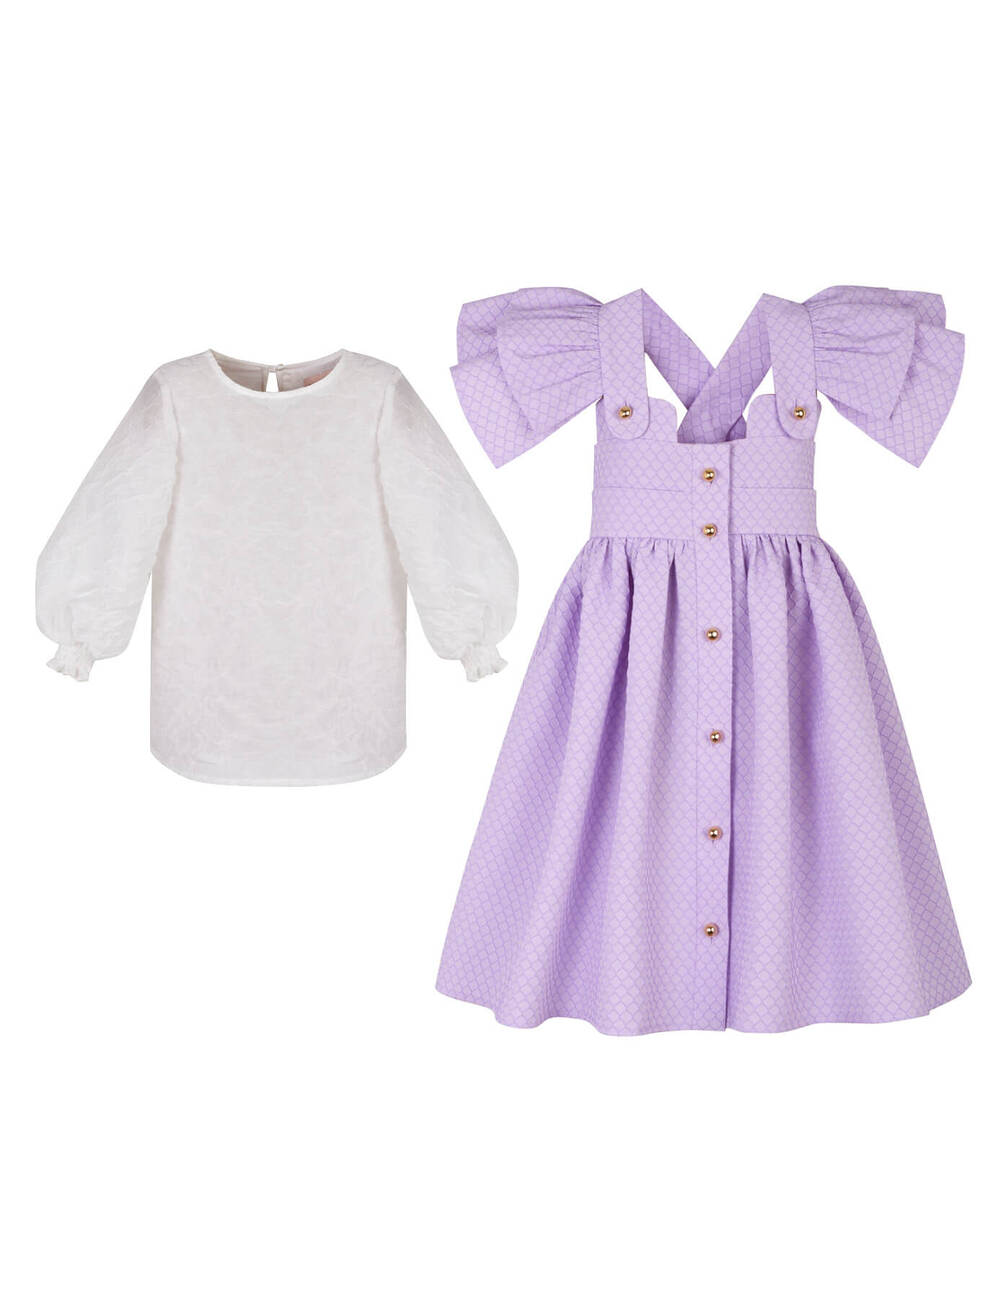 AW22 PETITE LOOK 03 VIOLET SET OF DRESS AND BLOUSE